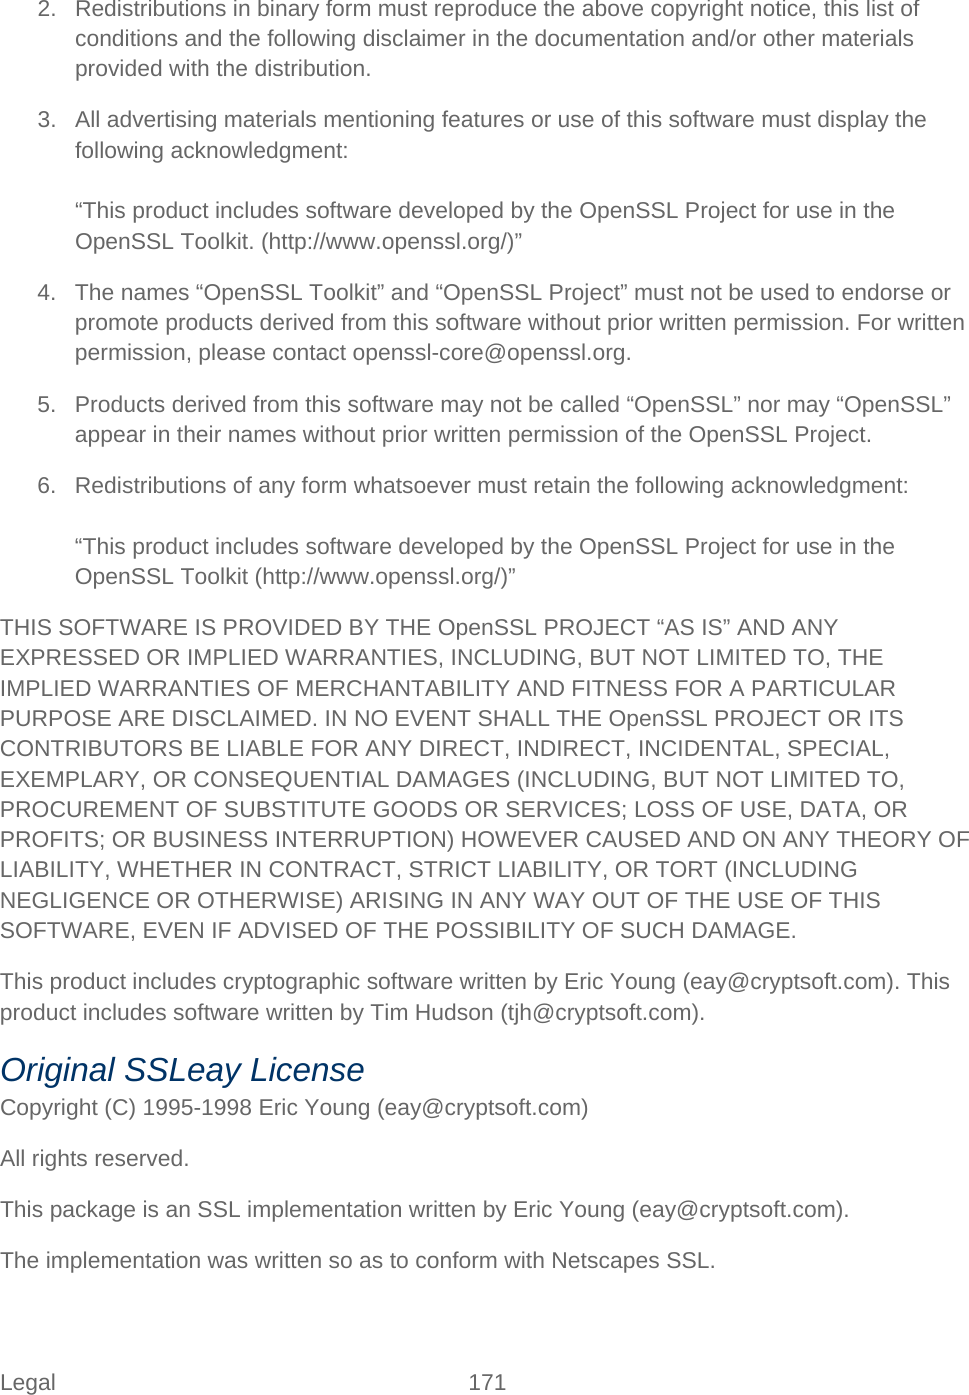 Legal 171   2. Redistributions in binary form must reproduce the above copyright notice, this list of conditions and the following disclaimer in the documentation and/or other materials provided with the distribution. 3. All advertising materials mentioning features or use of this software must display the following acknowledgment:  “This product includes software developed by the OpenSSL Project for use in the OpenSSL Toolkit. (http://www.openssl.org/)” 4. The names “OpenSSL Toolkit” and “OpenSSL Project” must not be used to endorse or promote products derived from this software without prior written permission. For written permission, please contact openssl-core@openssl.org. 5. Products derived from this software may not be called “OpenSSL” nor may “OpenSSL” appear in their names without prior written permission of the OpenSSL Project. 6. Redistributions of any form whatsoever must retain the following acknowledgment:  “This product includes software developed by the OpenSSL Project for use in the OpenSSL Toolkit (http://www.openssl.org/)” THIS SOFTWARE IS PROVIDED BY THE OpenSSL PROJECT “AS IS” AND ANY EXPRESSED OR IMPLIED WARRANTIES, INCLUDING, BUT NOT LIMITED TO, THE IMPLIED WARRANTIES OF MERCHANTABILITY AND FITNESS FOR A PARTICULAR PURPOSE ARE DISCLAIMED. IN NO EVENT SHALL THE OpenSSL PROJECT OR ITS CONTRIBUTORS BE LIABLE FOR ANY DIRECT, INDIRECT, INCIDENTAL, SPECIAL, EXEMPLARY, OR CONSEQUENTIAL DAMAGES (INCLUDING, BUT NOT LIMITED TO, PROCUREMENT OF SUBSTITUTE GOODS OR SERVICES; LOSS OF USE, DATA, OR PROFITS; OR BUSINESS INTERRUPTION) HOWEVER CAUSED AND ON ANY THEORY OF LIABILITY, WHETHER IN CONTRACT, STRICT LIABILITY, OR TORT (INCLUDING NEGLIGENCE OR OTHERWISE) ARISING IN ANY WAY OUT OF THE USE OF THIS SOFTWARE, EVEN IF ADVISED OF THE POSSIBILITY OF SUCH DAMAGE. This product includes cryptographic software written by Eric Young (eay@cryptsoft.com). This product includes software written by Tim Hudson (tjh@cryptsoft.com). Original SSLeay License Copyright (C) 1995-1998 Eric Young (eay@cryptsoft.com) All rights reserved. This package is an SSL implementation written by Eric Young (eay@cryptsoft.com). The implementation was written so as to conform with Netscapes SSL. 